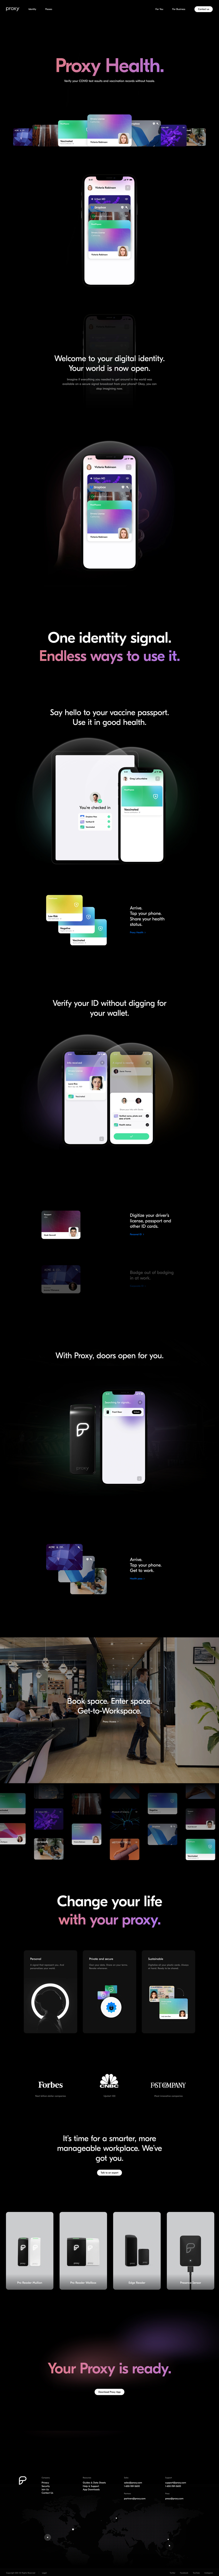 Proxy Landing Page Example: Proxy empowers people with a digital identity that transforms how they access and experience the world around them.